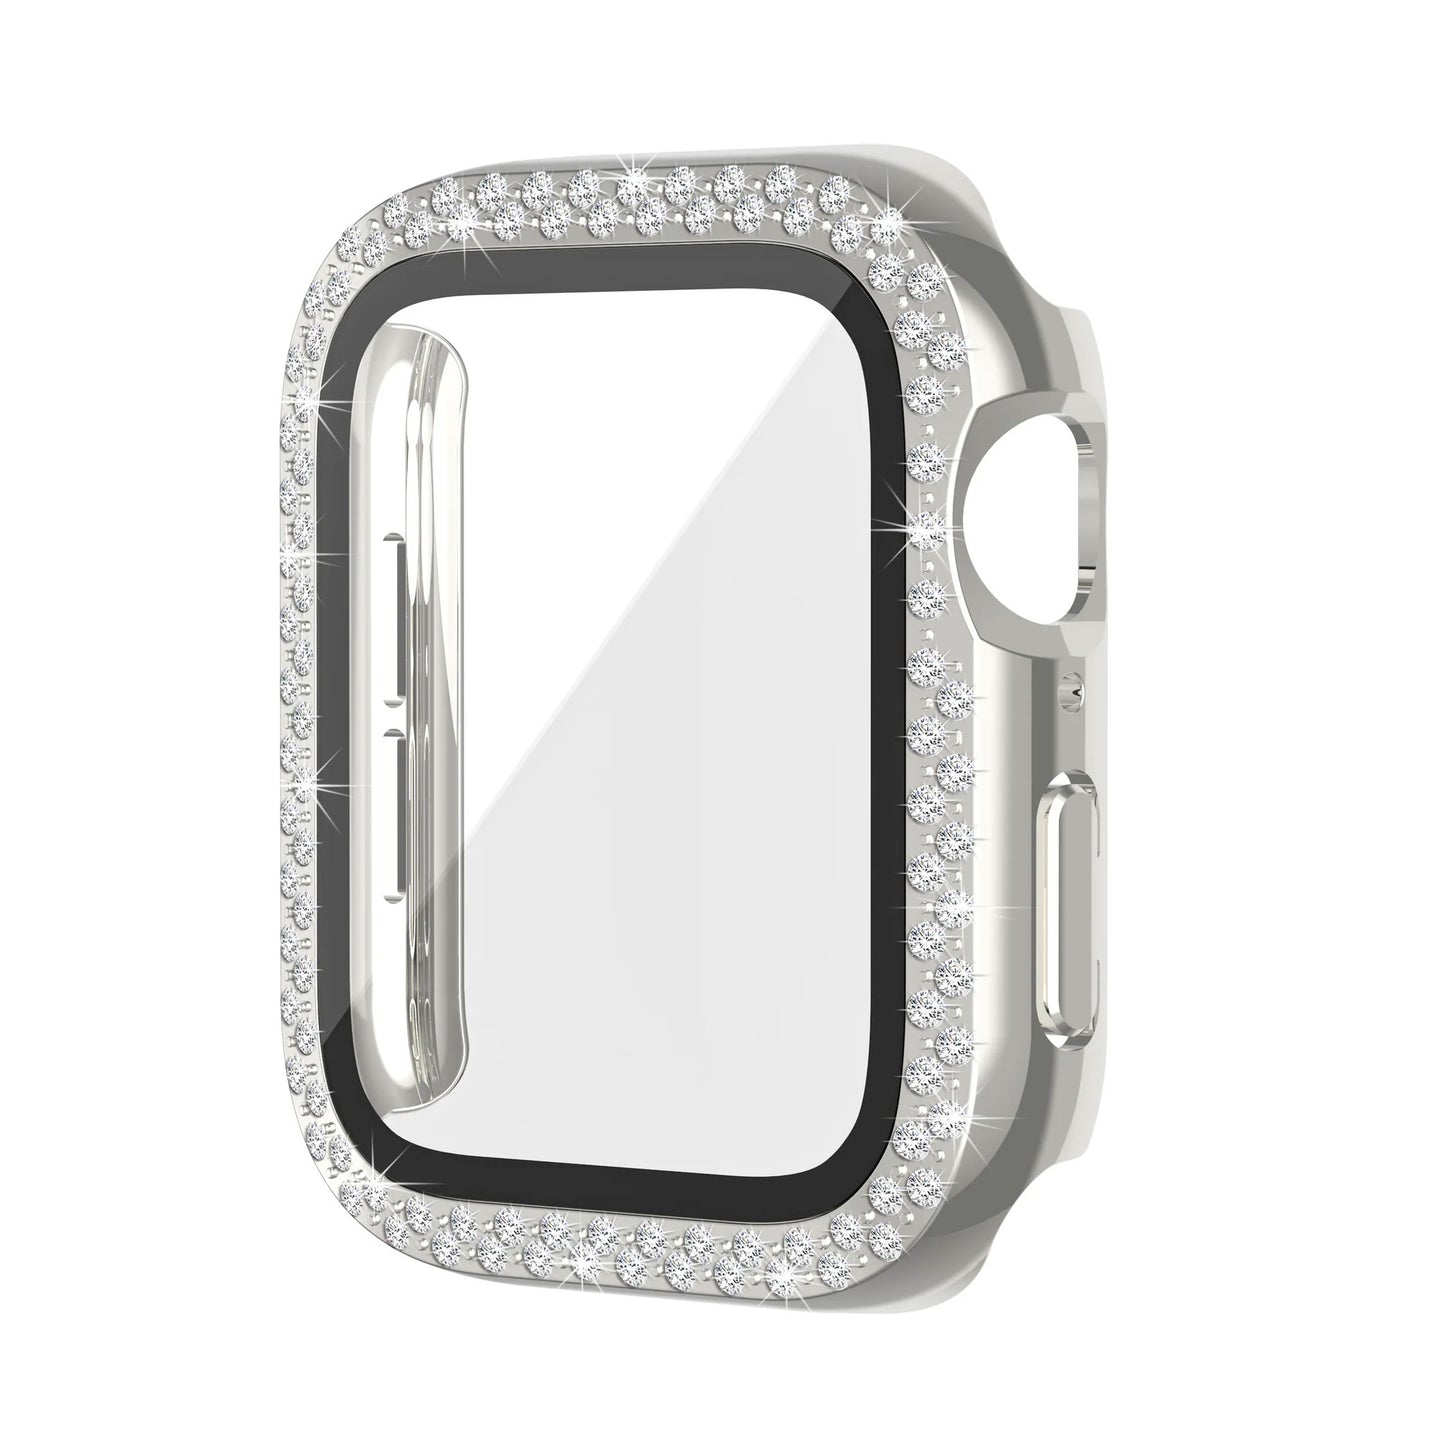 Bling Bumper Case with Tempered Glass Screen Protector Compatible with Apple Watch 38mm